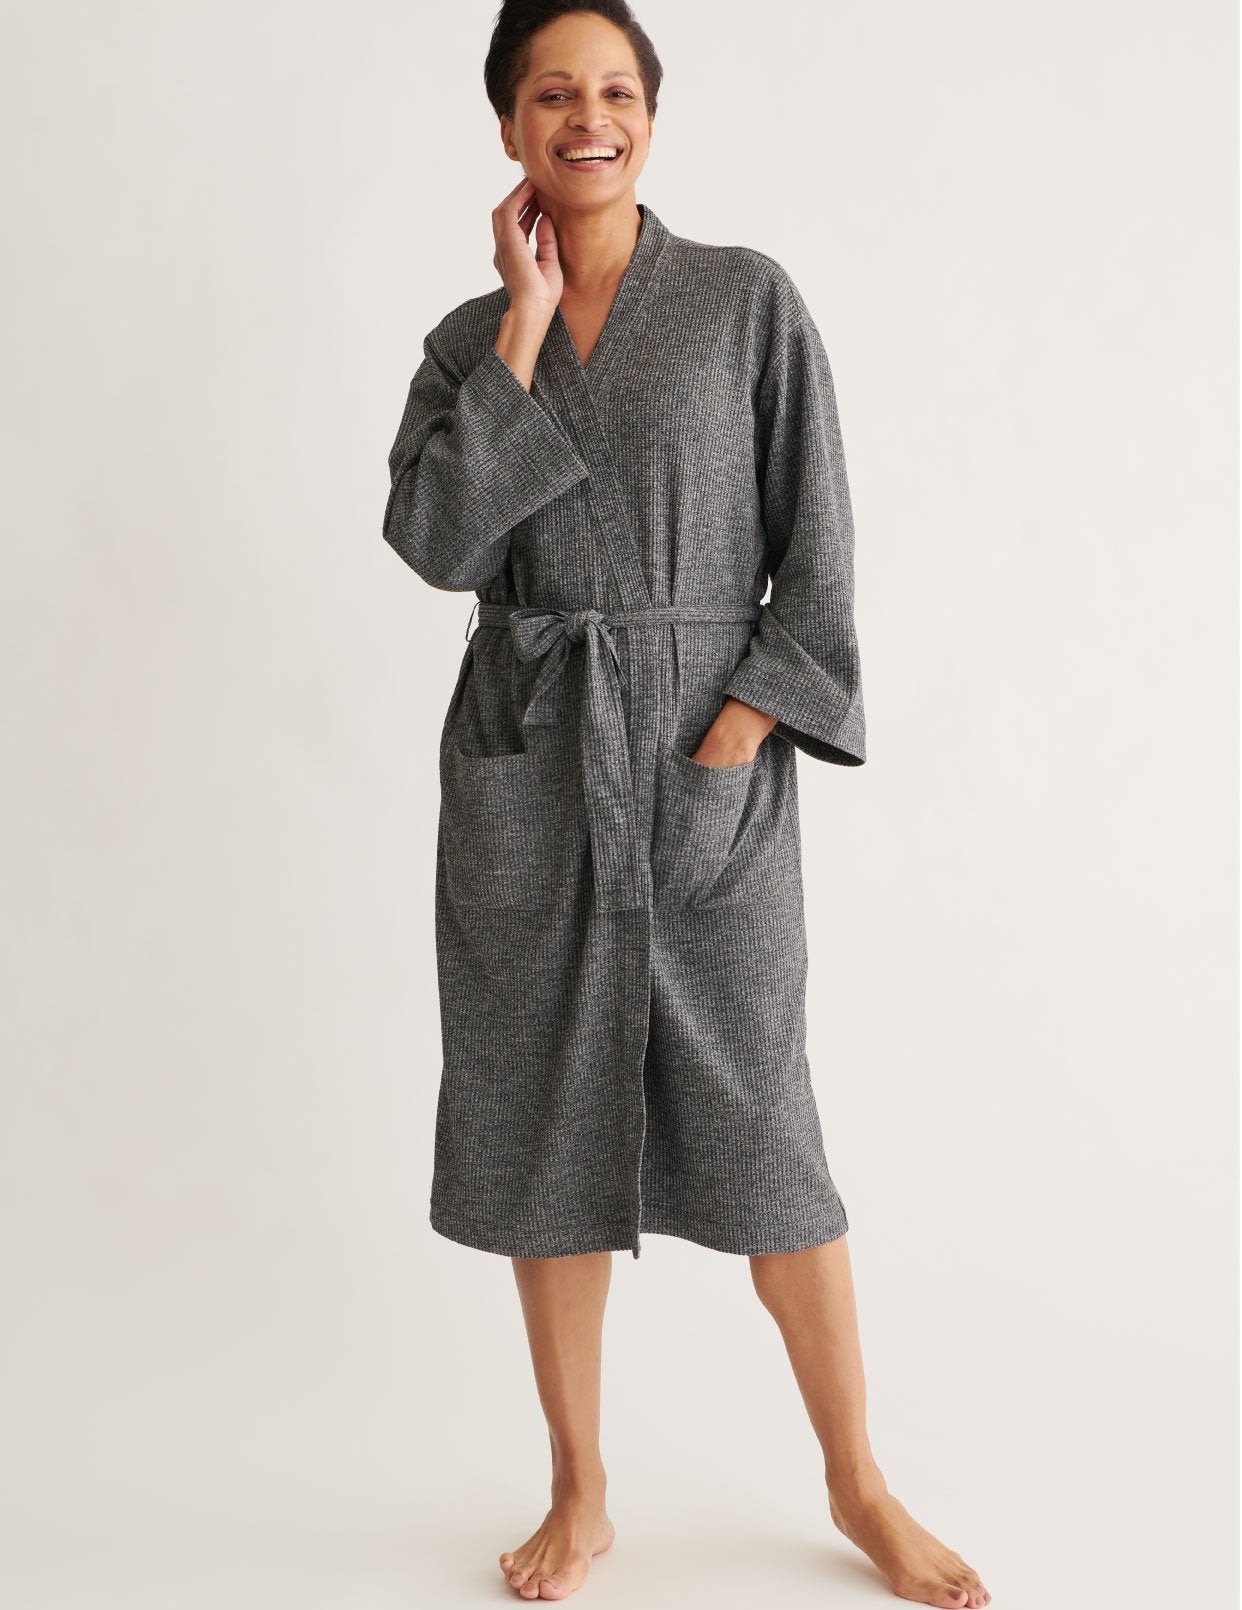 100% COTTON BATH ROBE NIGHT WARE TOWELLING DRESSING GOWN BATHROBE WITH BELT 